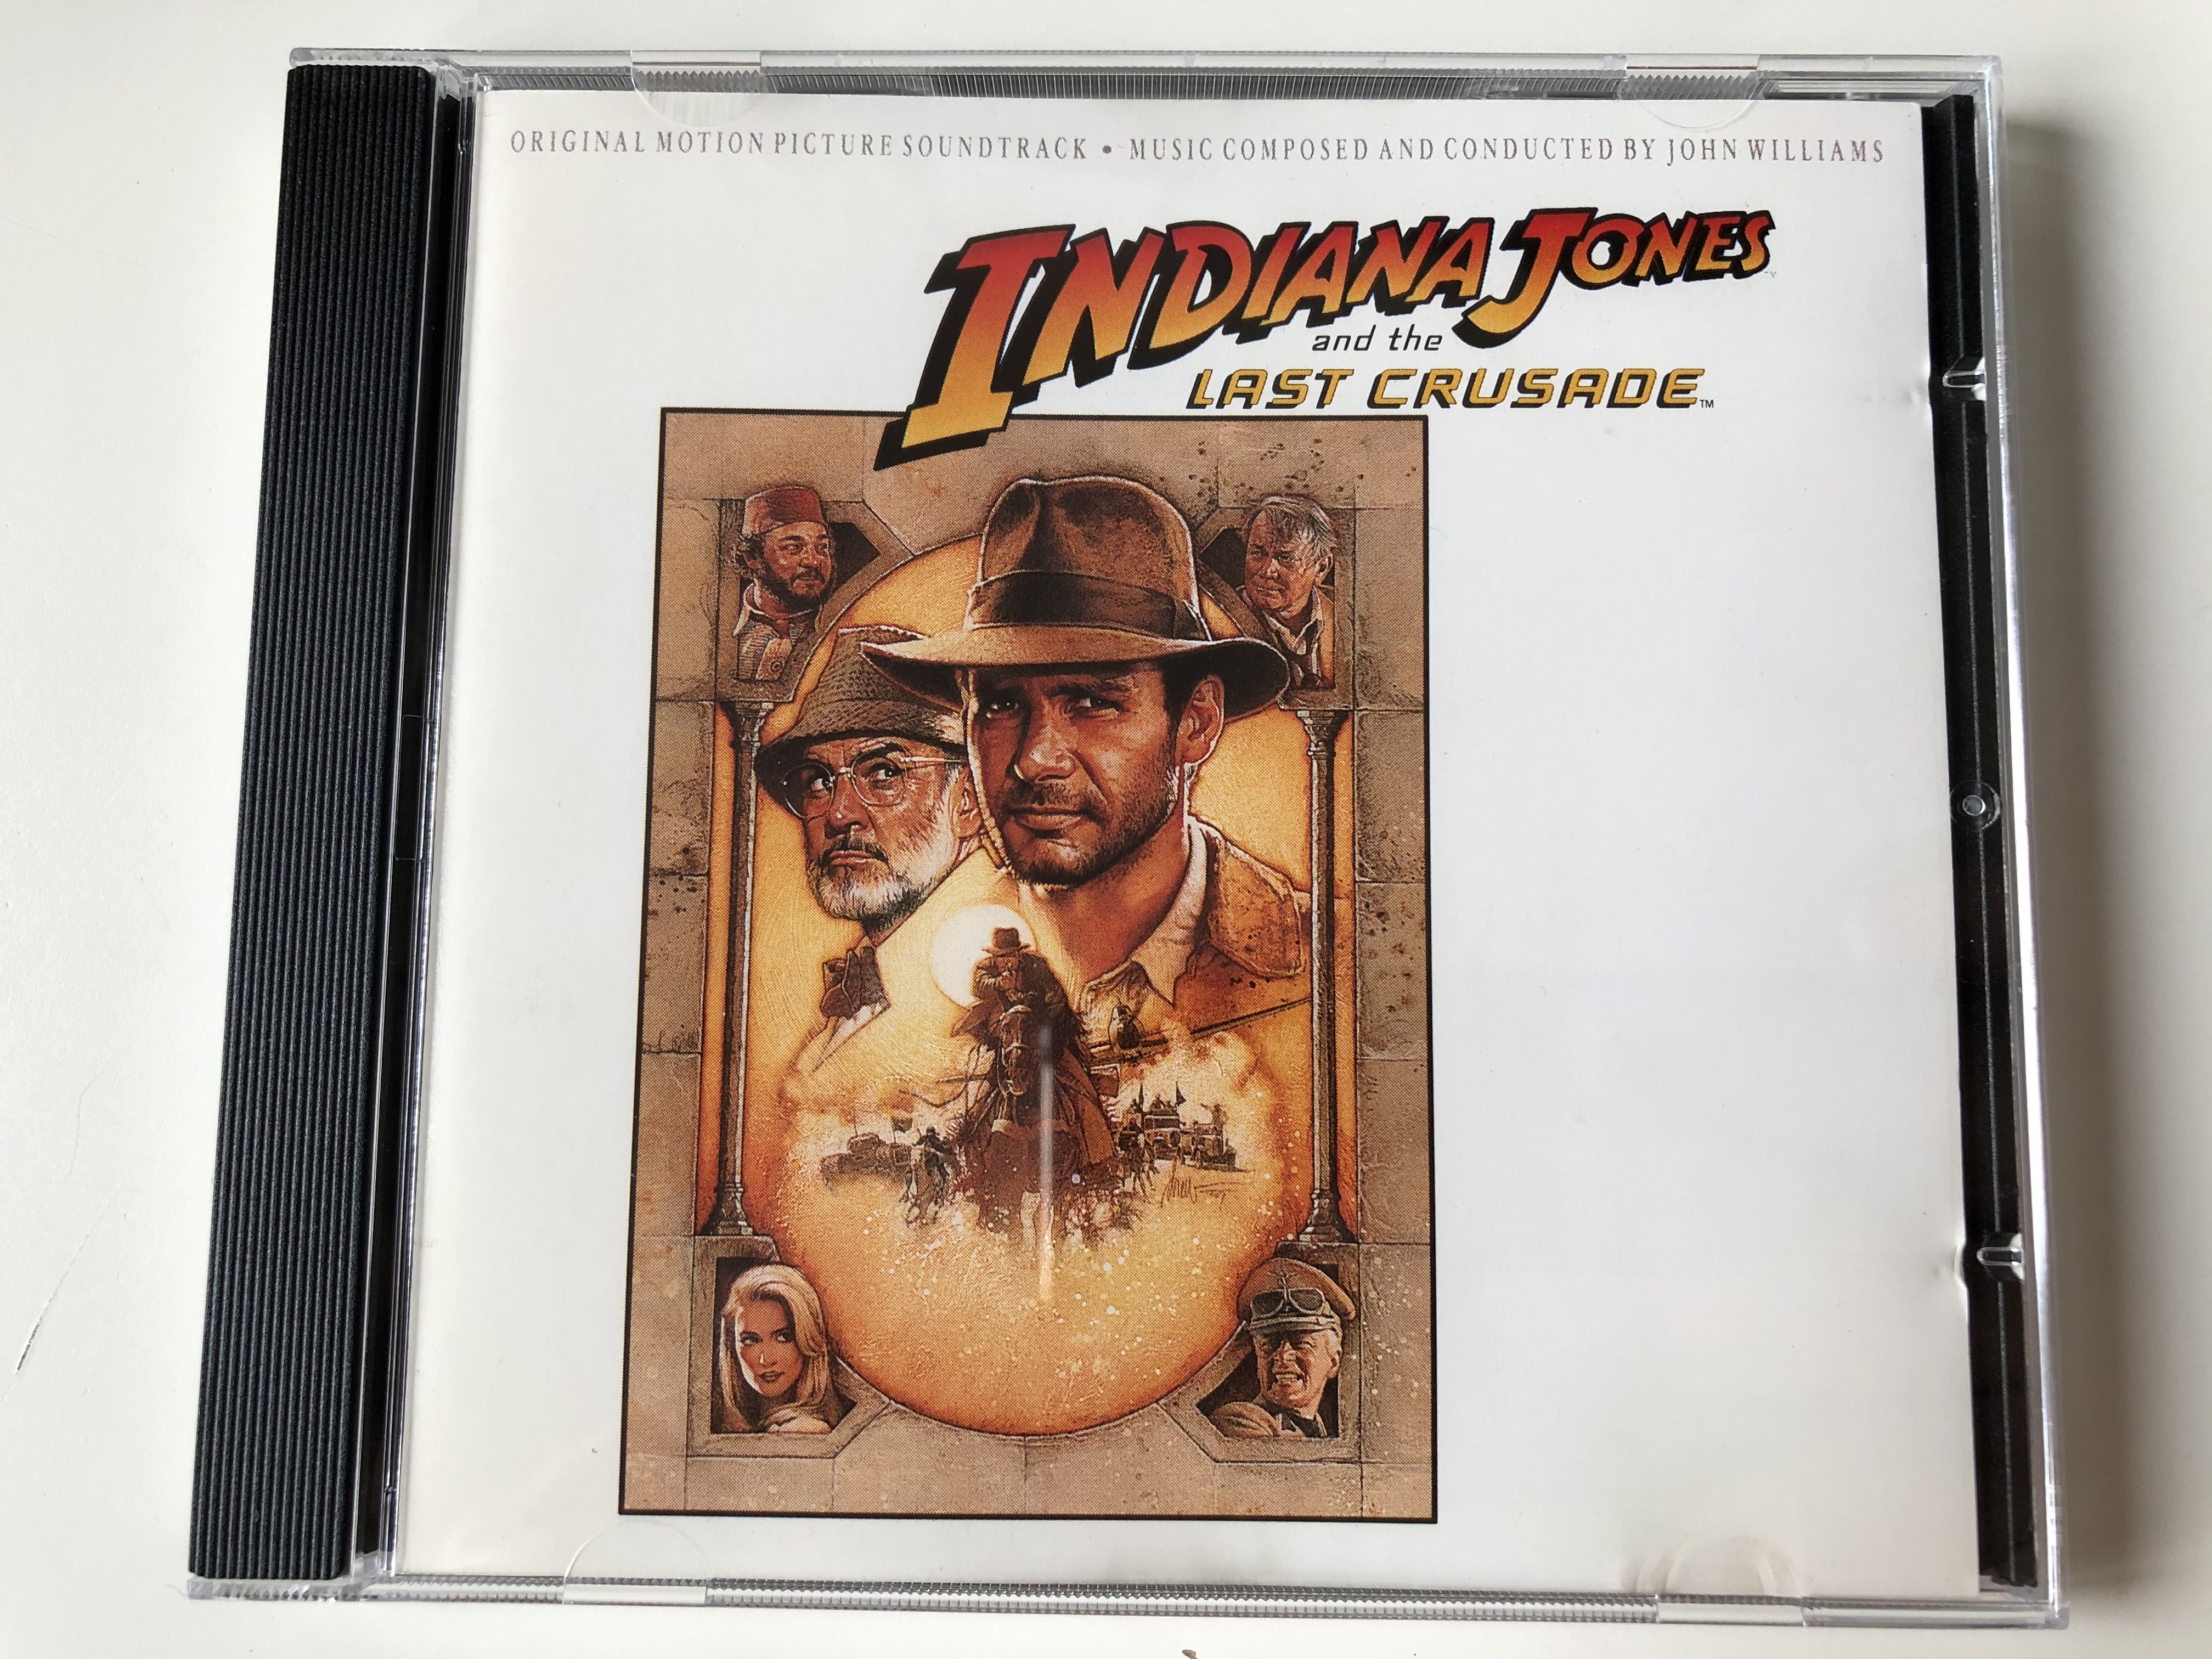 indiana-jones-and-the-last-crusade-original-motion-picture-soundtrack-music-composed-and-conducted-by-john-williams-warner-bros.-records-audio-cd-1989-925-883-2-1-.jpg